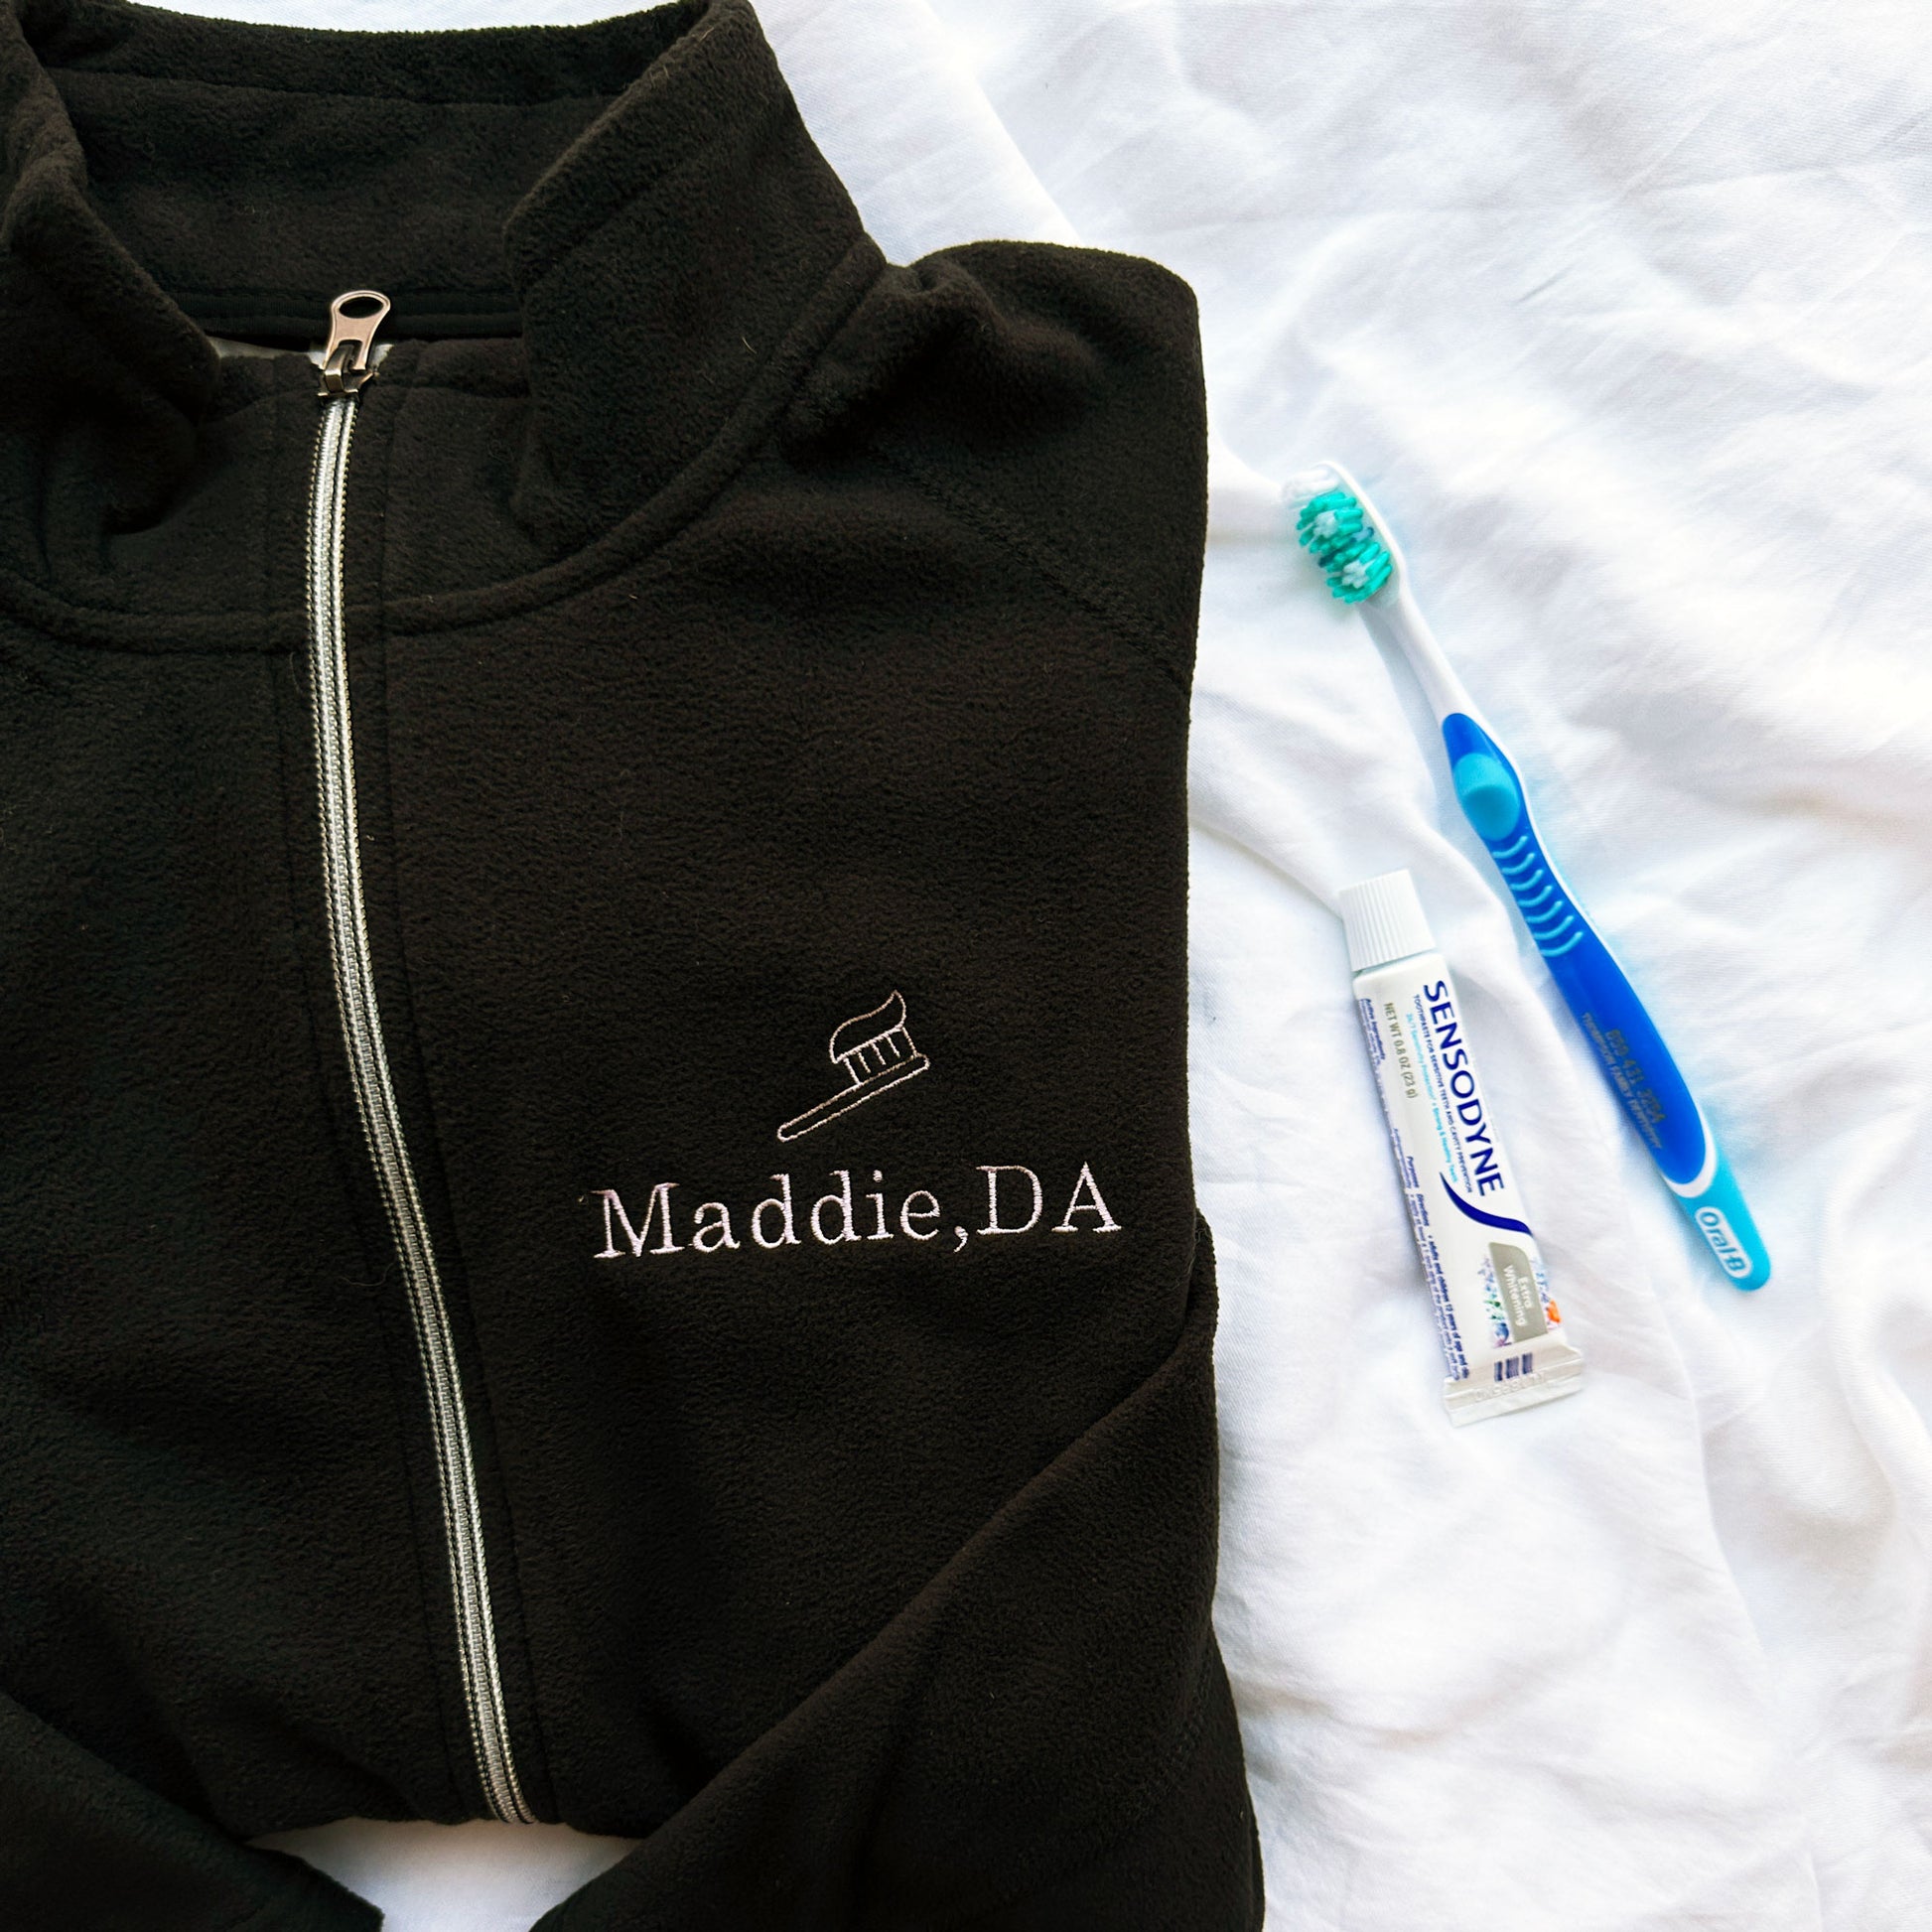 full zip fleece black jacket with mini embroidered toothbrush outline and name Maddie DA in lilac thread on the left chest